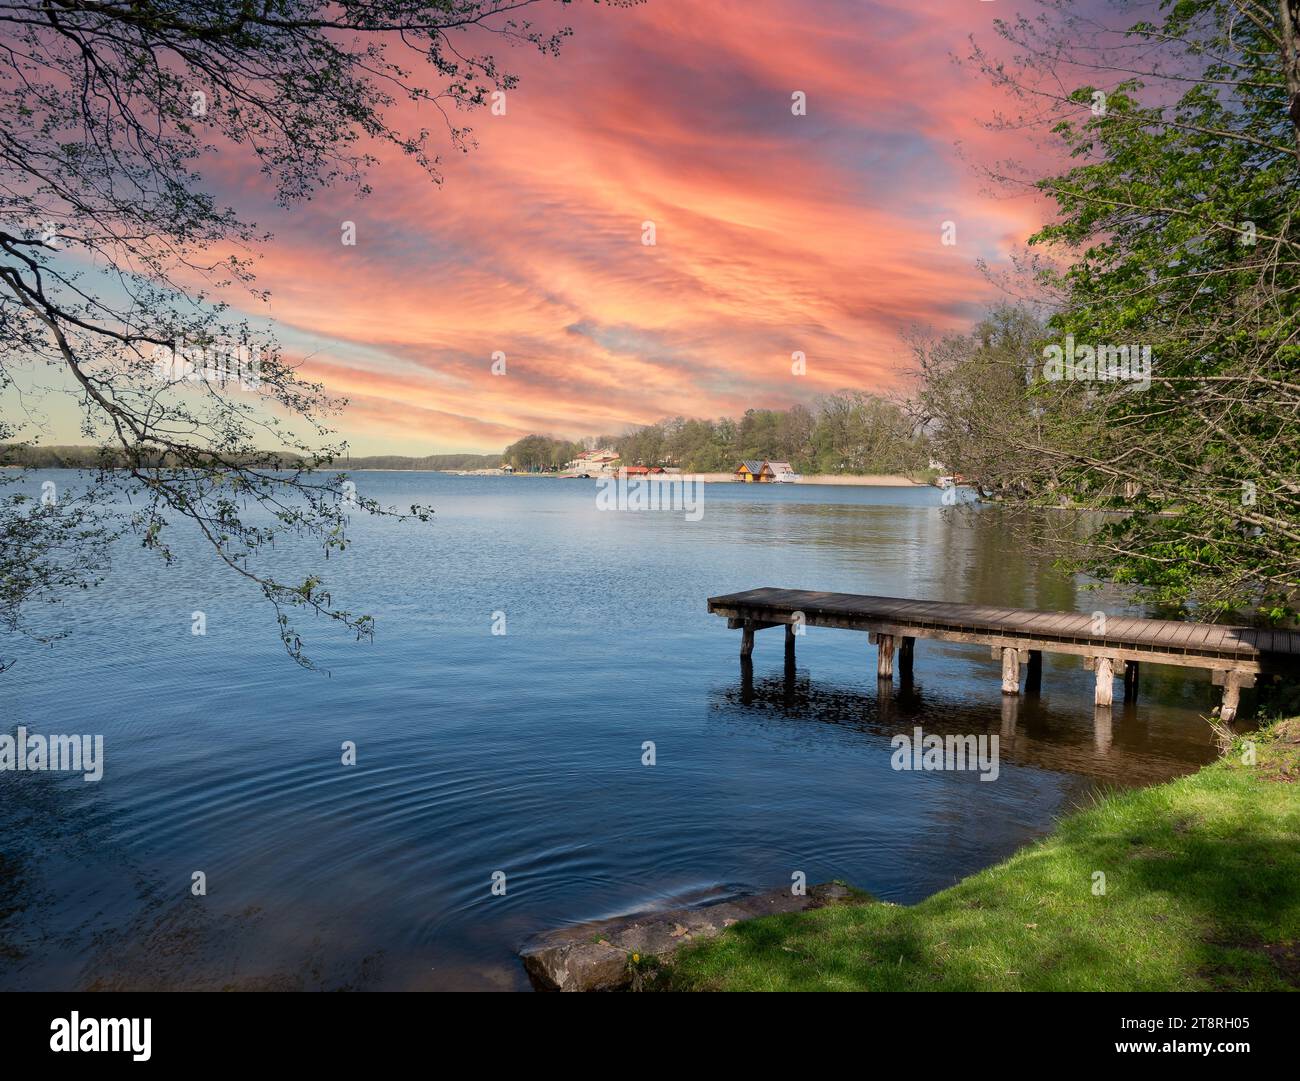 Sunset on a lake in the Mecklenburg Lake District with a wooden jetty Stock Photo